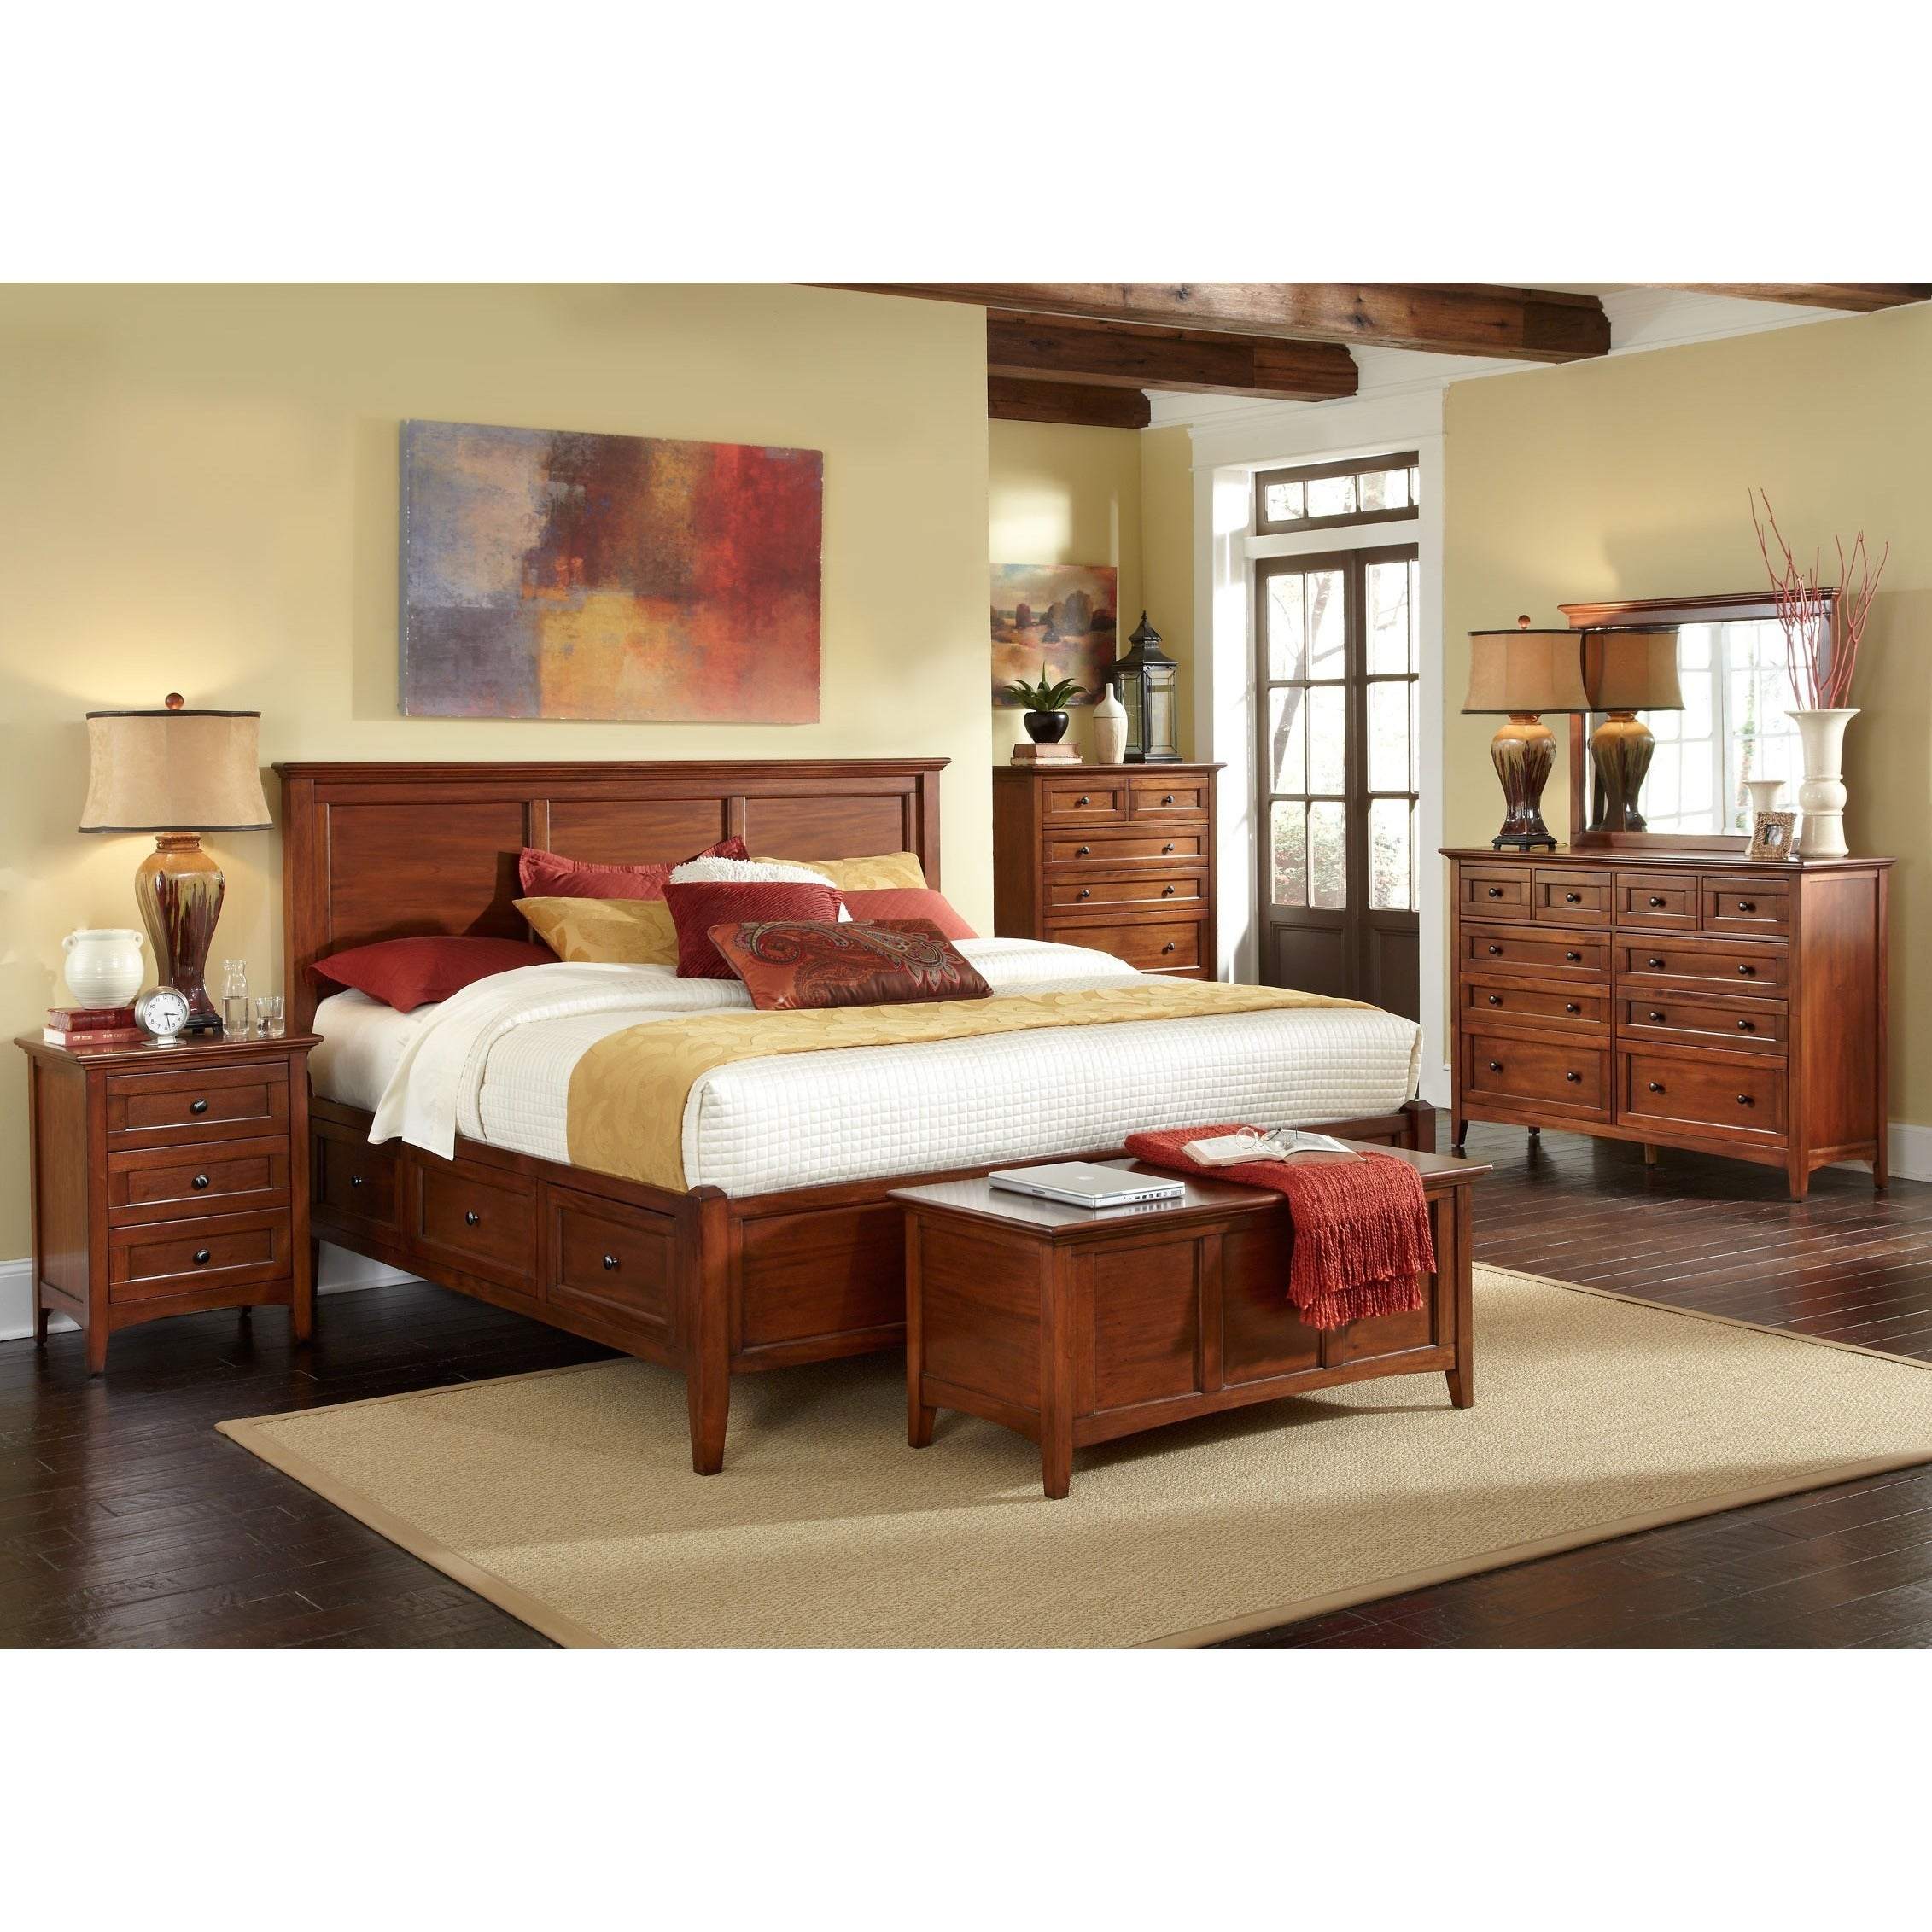 Simply Solid Aiden Solid Wood 7 Piece King Bedroom Collection regarding dimensions 2263 X 2263